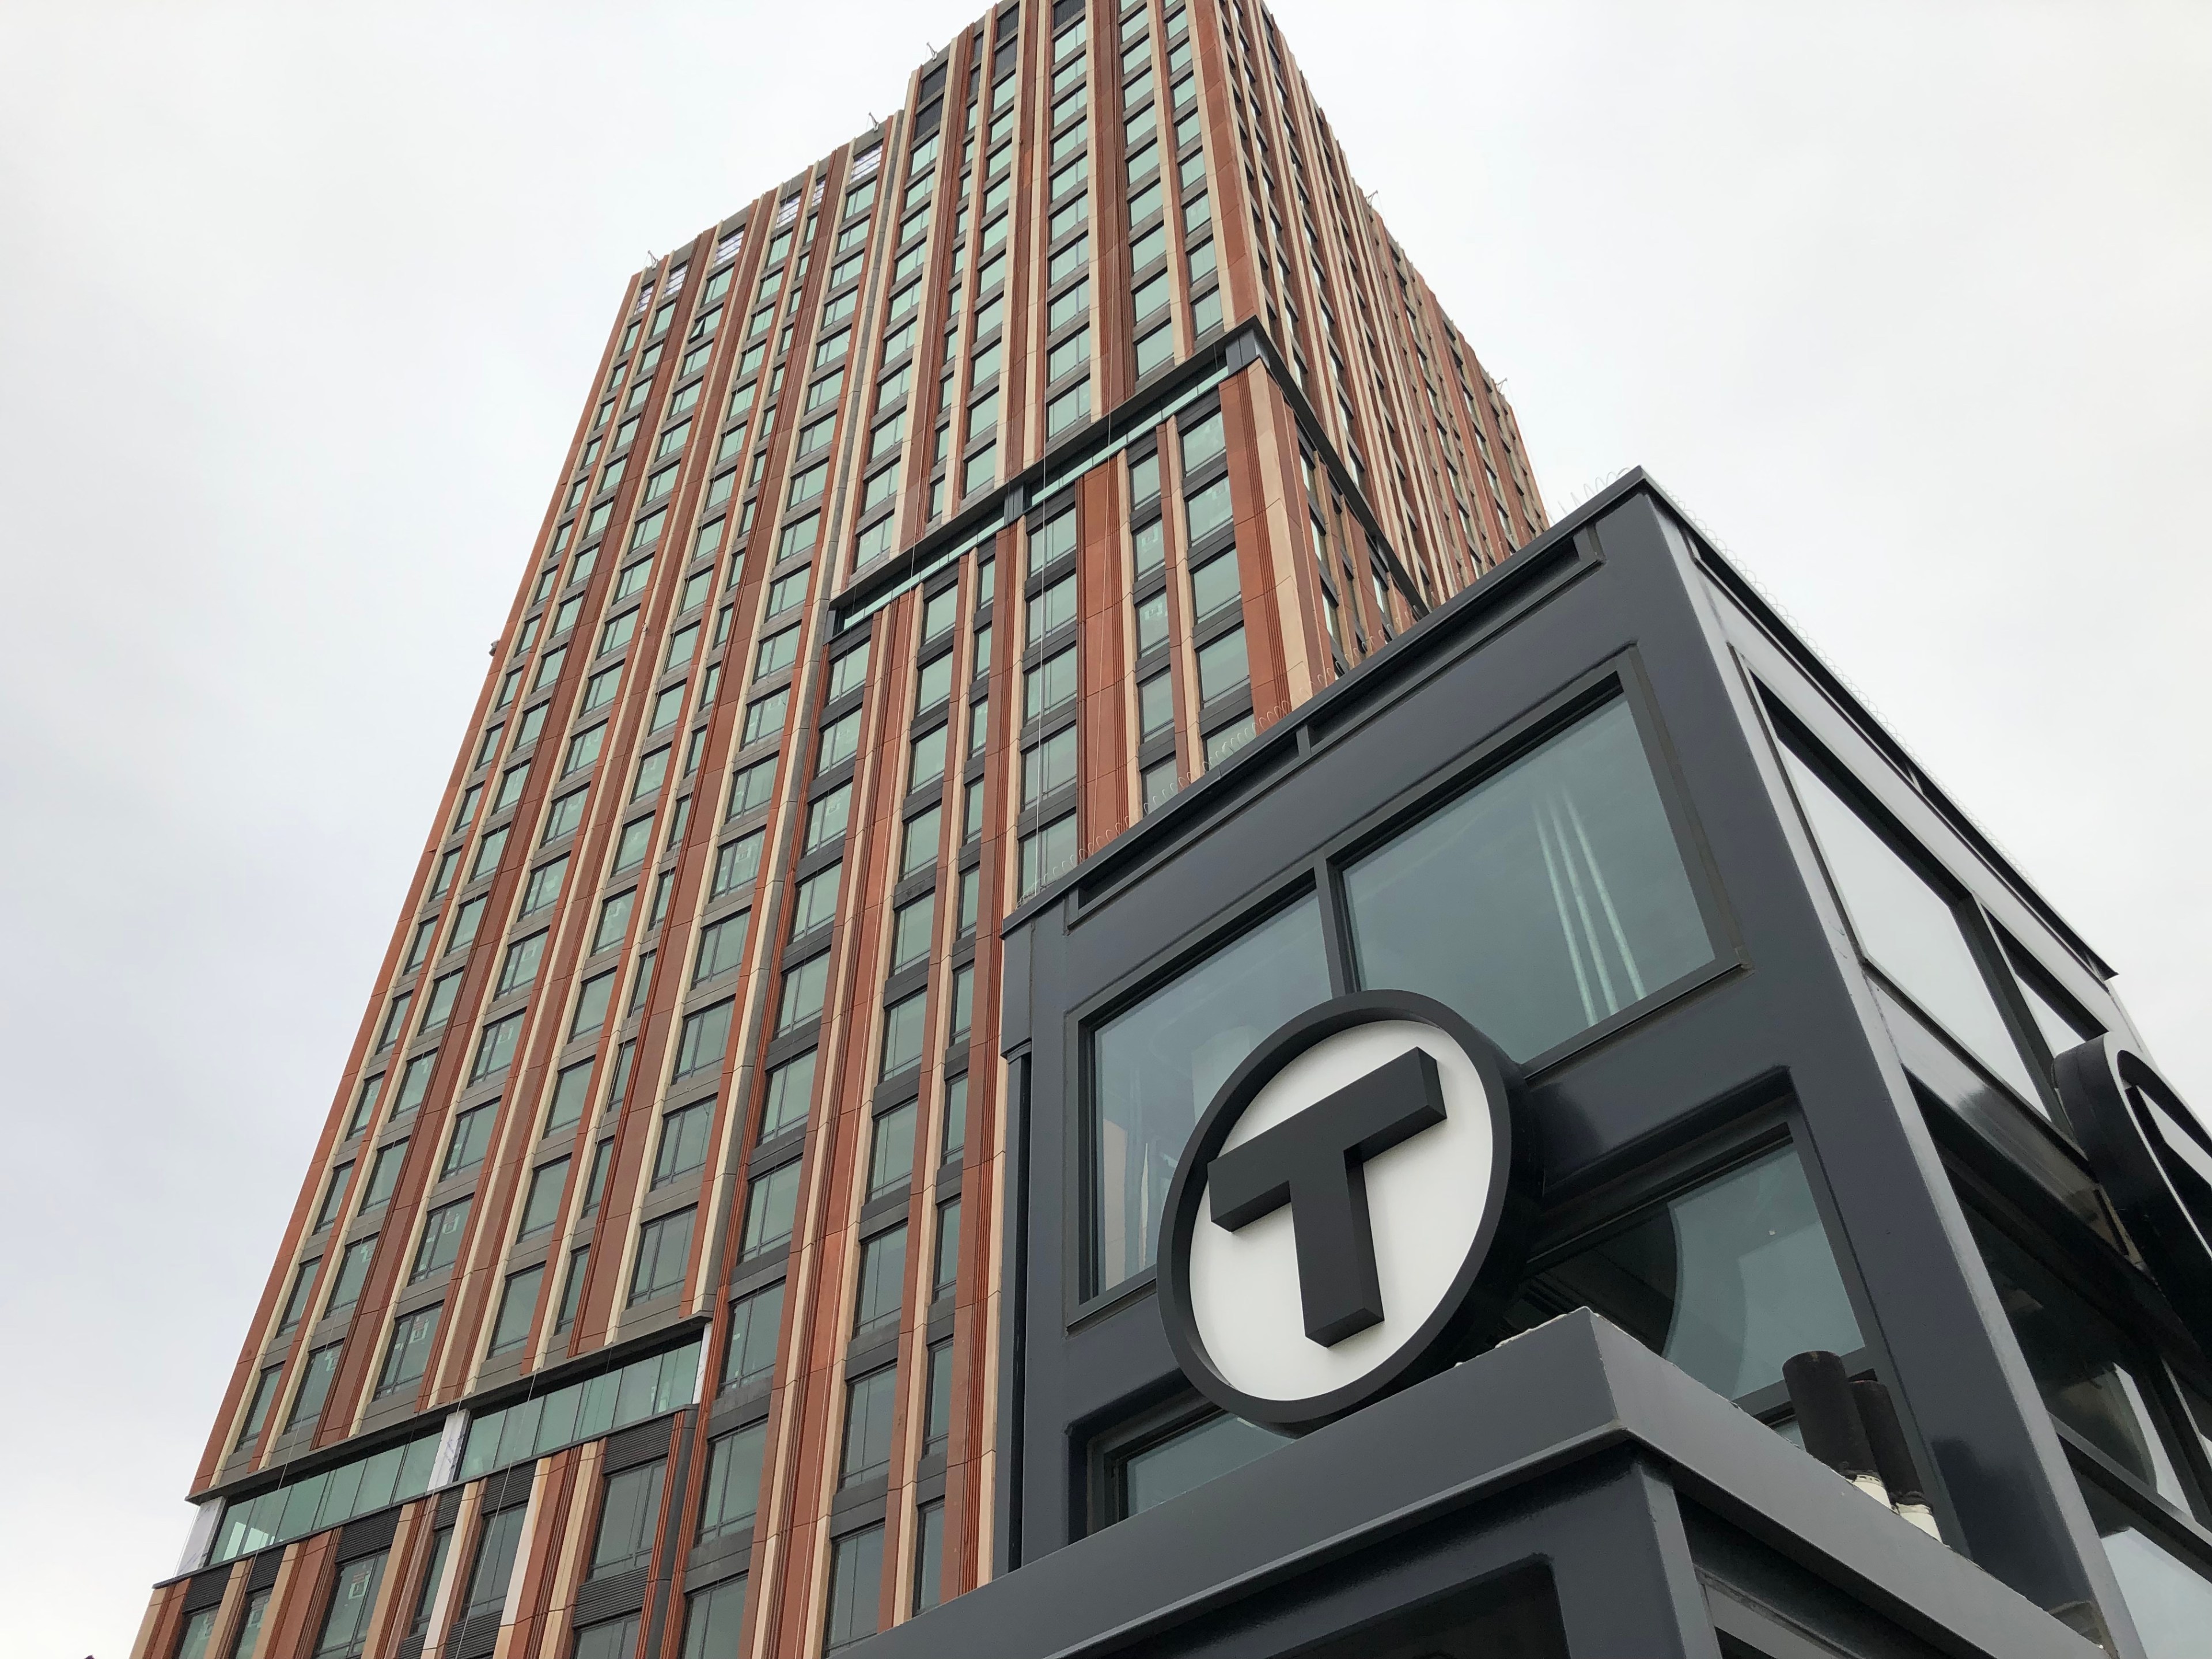 An apartment tower under construction, seen from the ground angle looking up into the sky. In the foreground is a black elevator enclosure with the MBTA T logo.